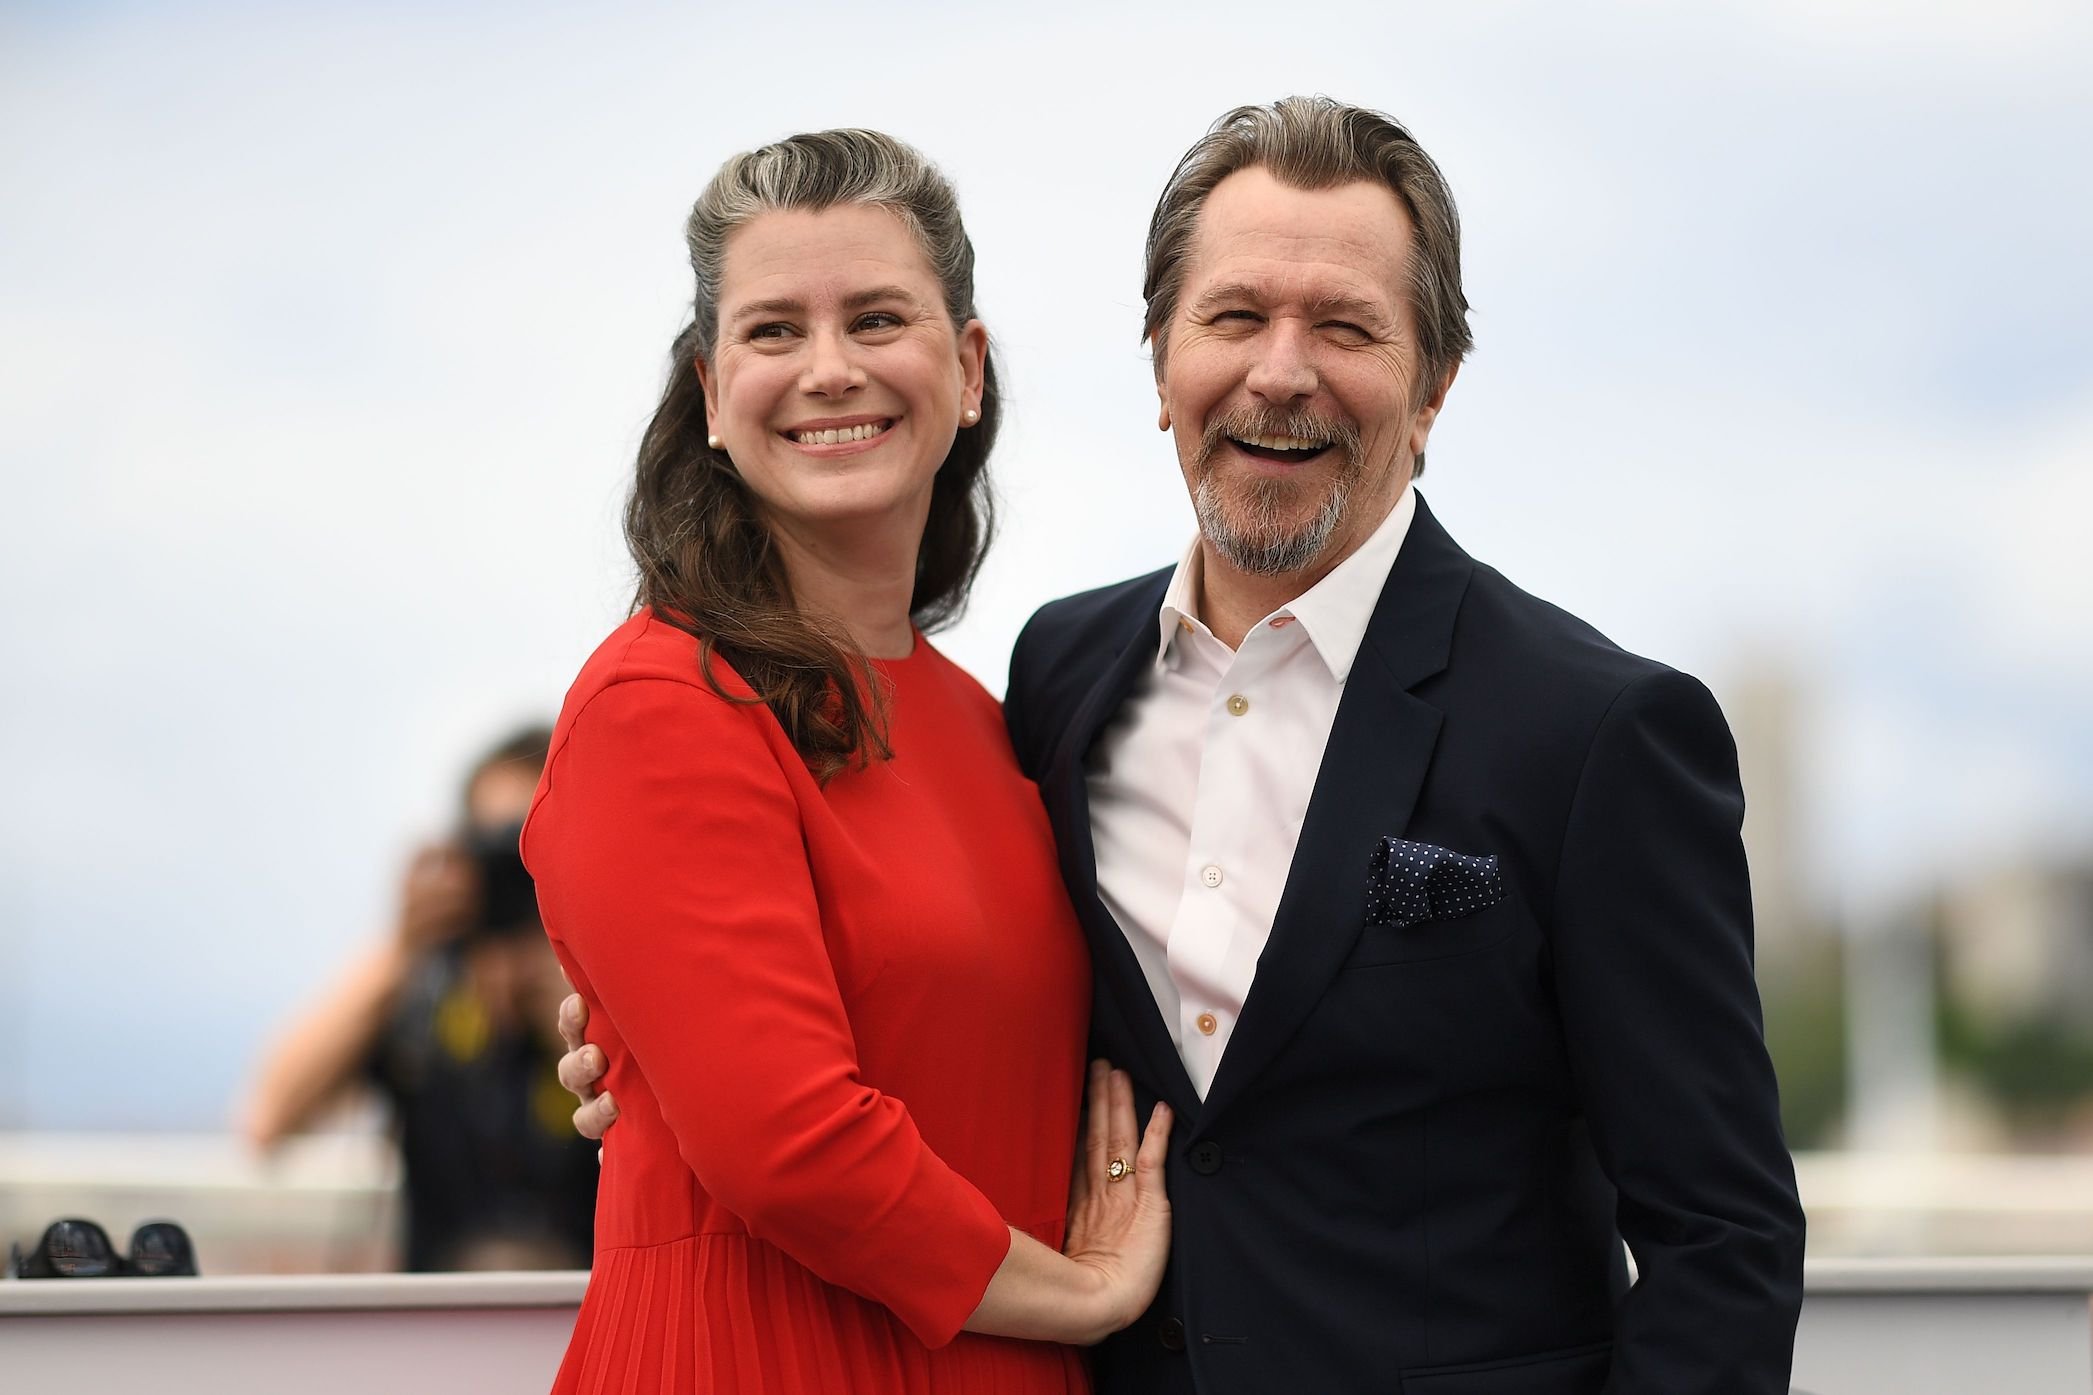 Gary Oldmans' spouse, Gisele Schmidt, standing next to Gary Oldman with her hand on his chest while smiling at the camera